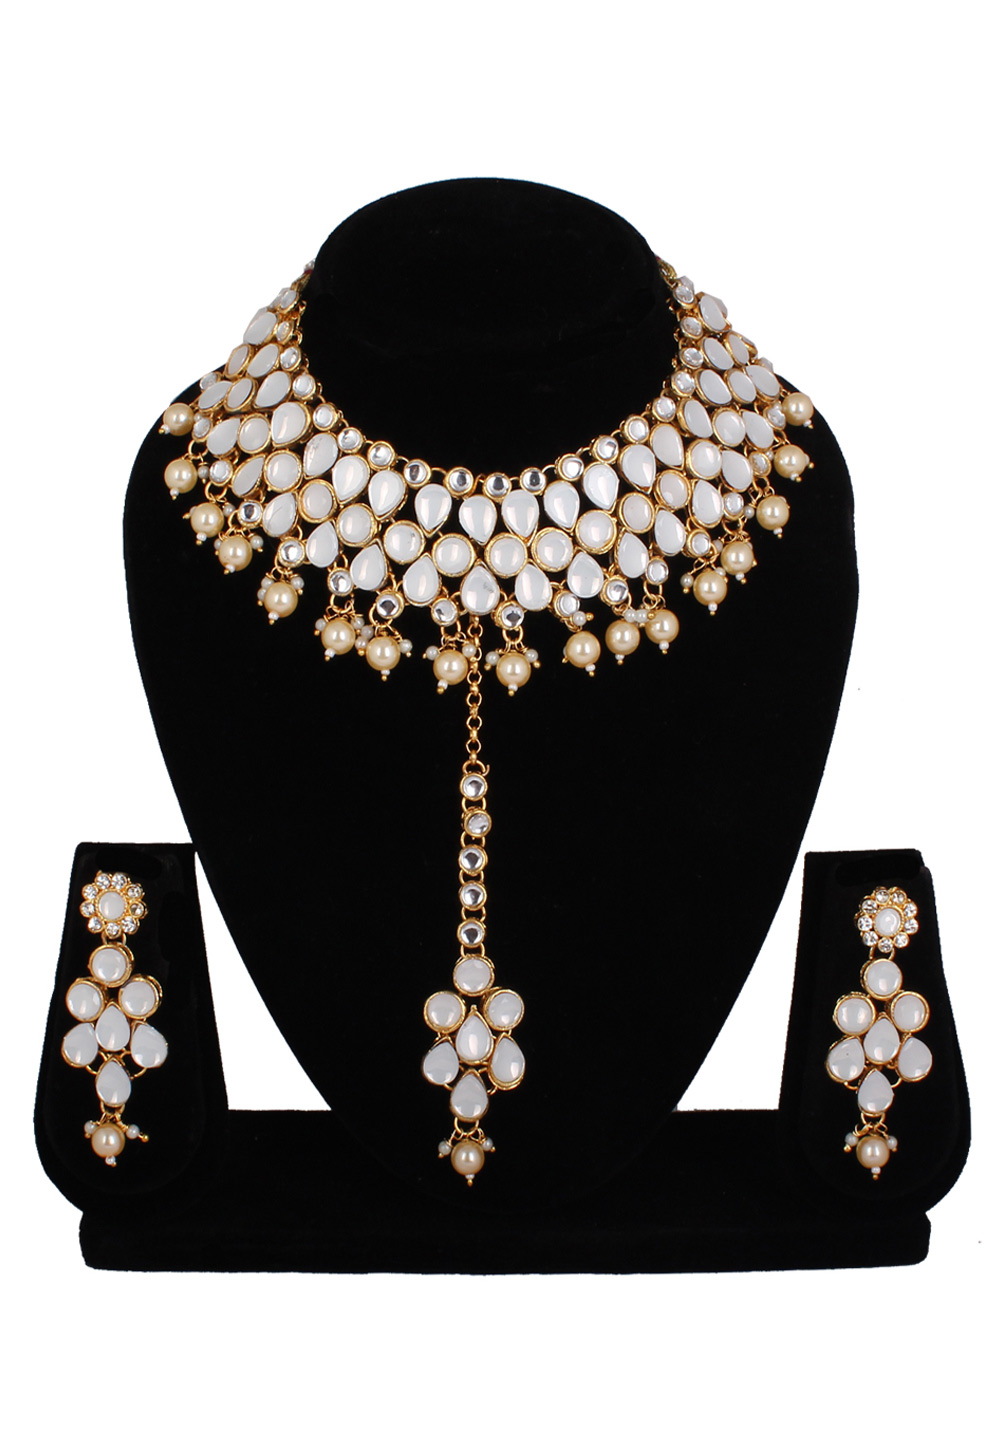 Off White Alloy Necklace Set With Earrings and Maang Tikka 257292